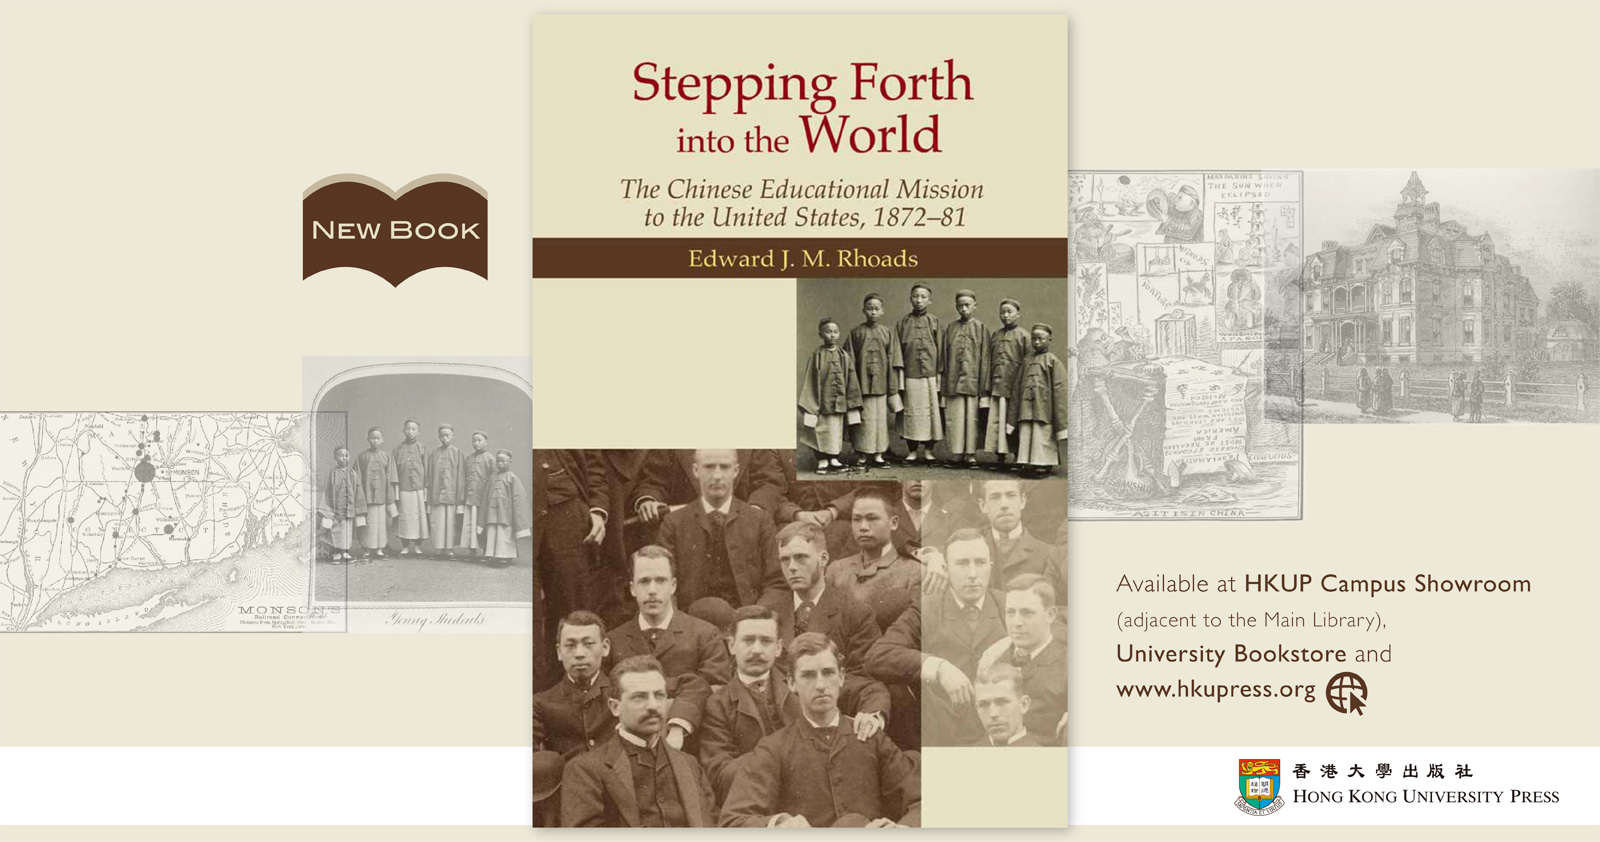 New book from HKU Press - Stepping Forth into the World